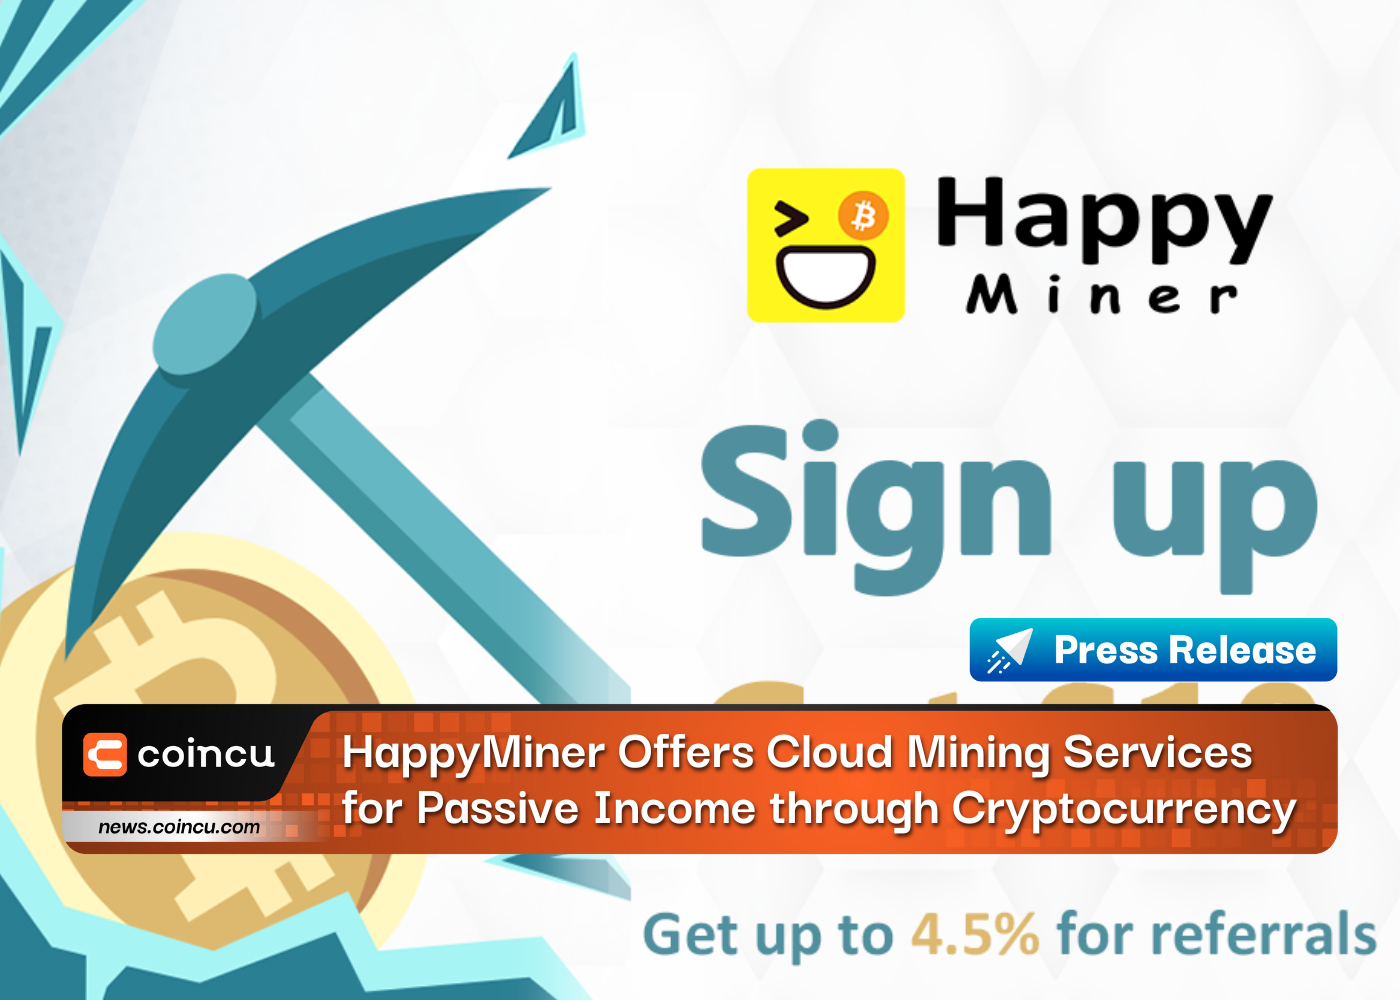 HappyMiner Offers Cloud Mining Services for Passive Income through Cryptocurrency